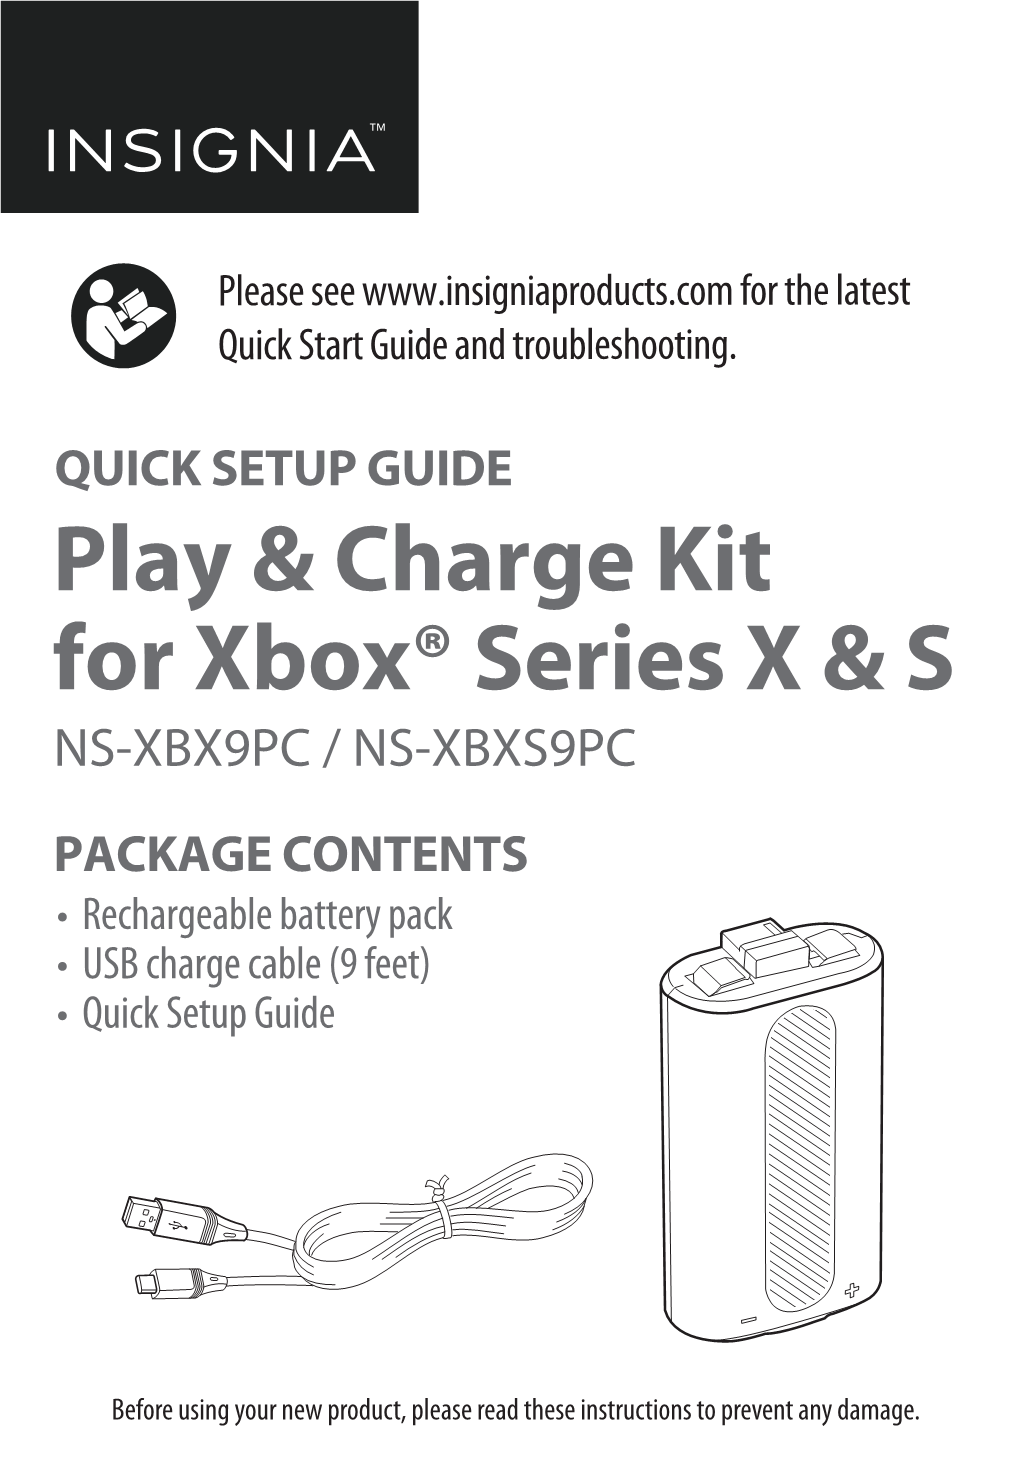 Play & Charge Kit for Xbox® Series X & S